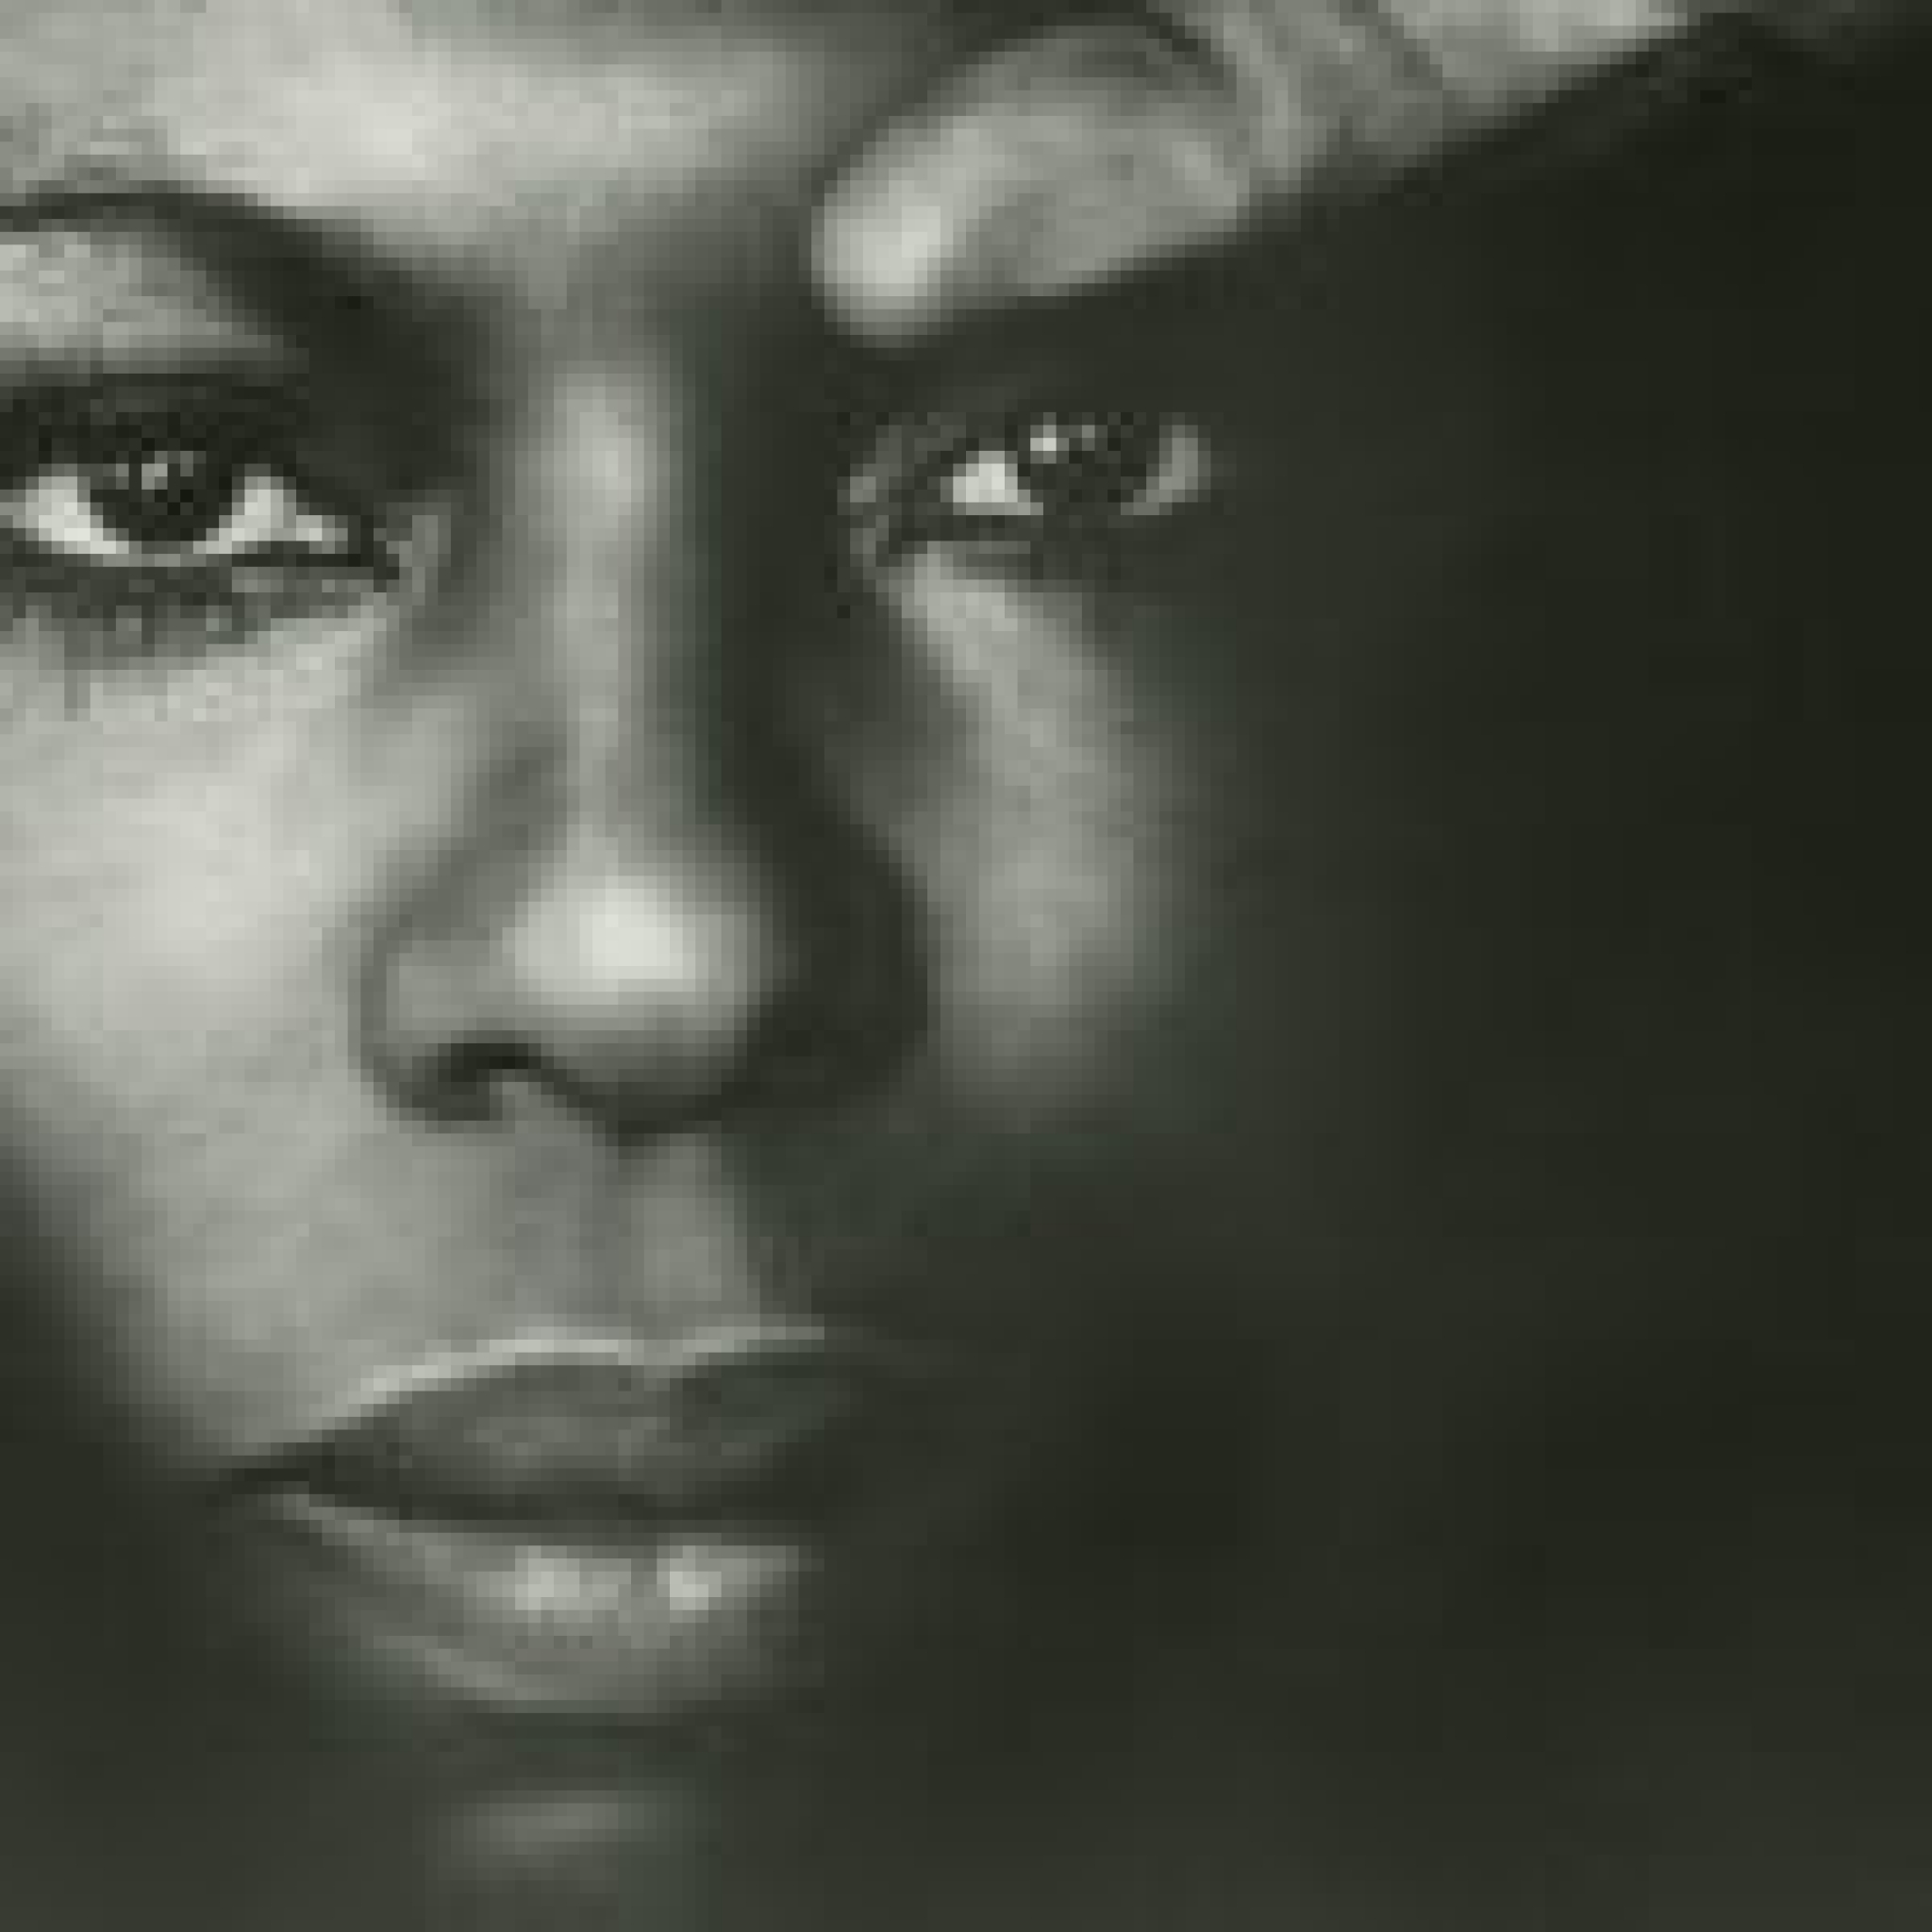 Roberta Flack, Klymaxx & More Among Women Songwriters Hall of Fame’s First Class